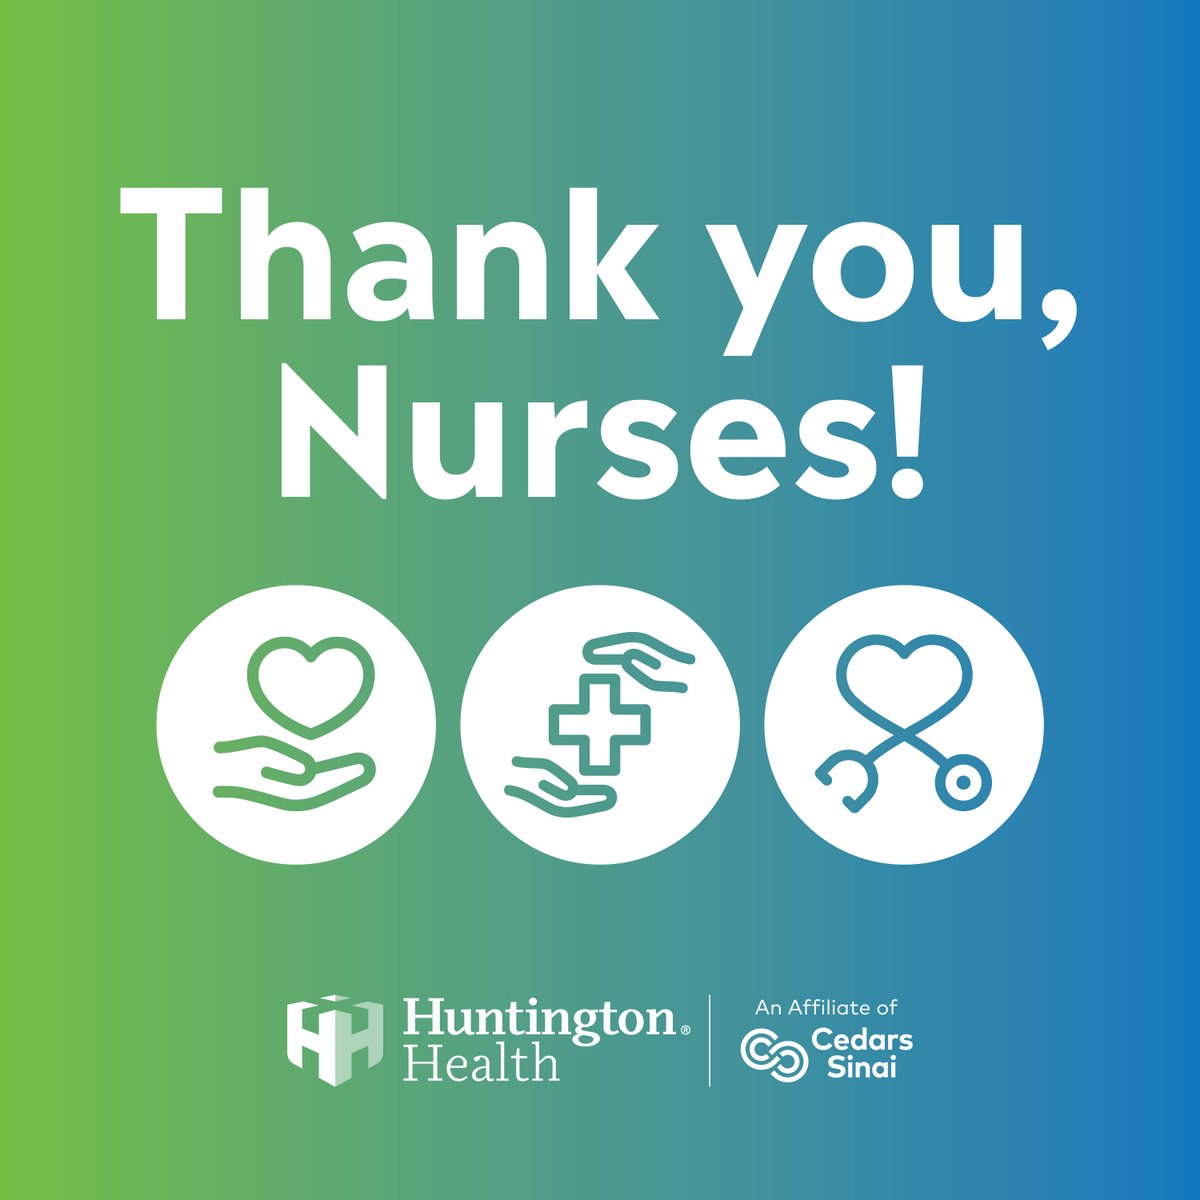 This week is #NationalNursesWeek, a time to celebrate and express our appreciation for our incredible nurses. Thank you for delivering excellent, compassionate care to our patients and community, every day!